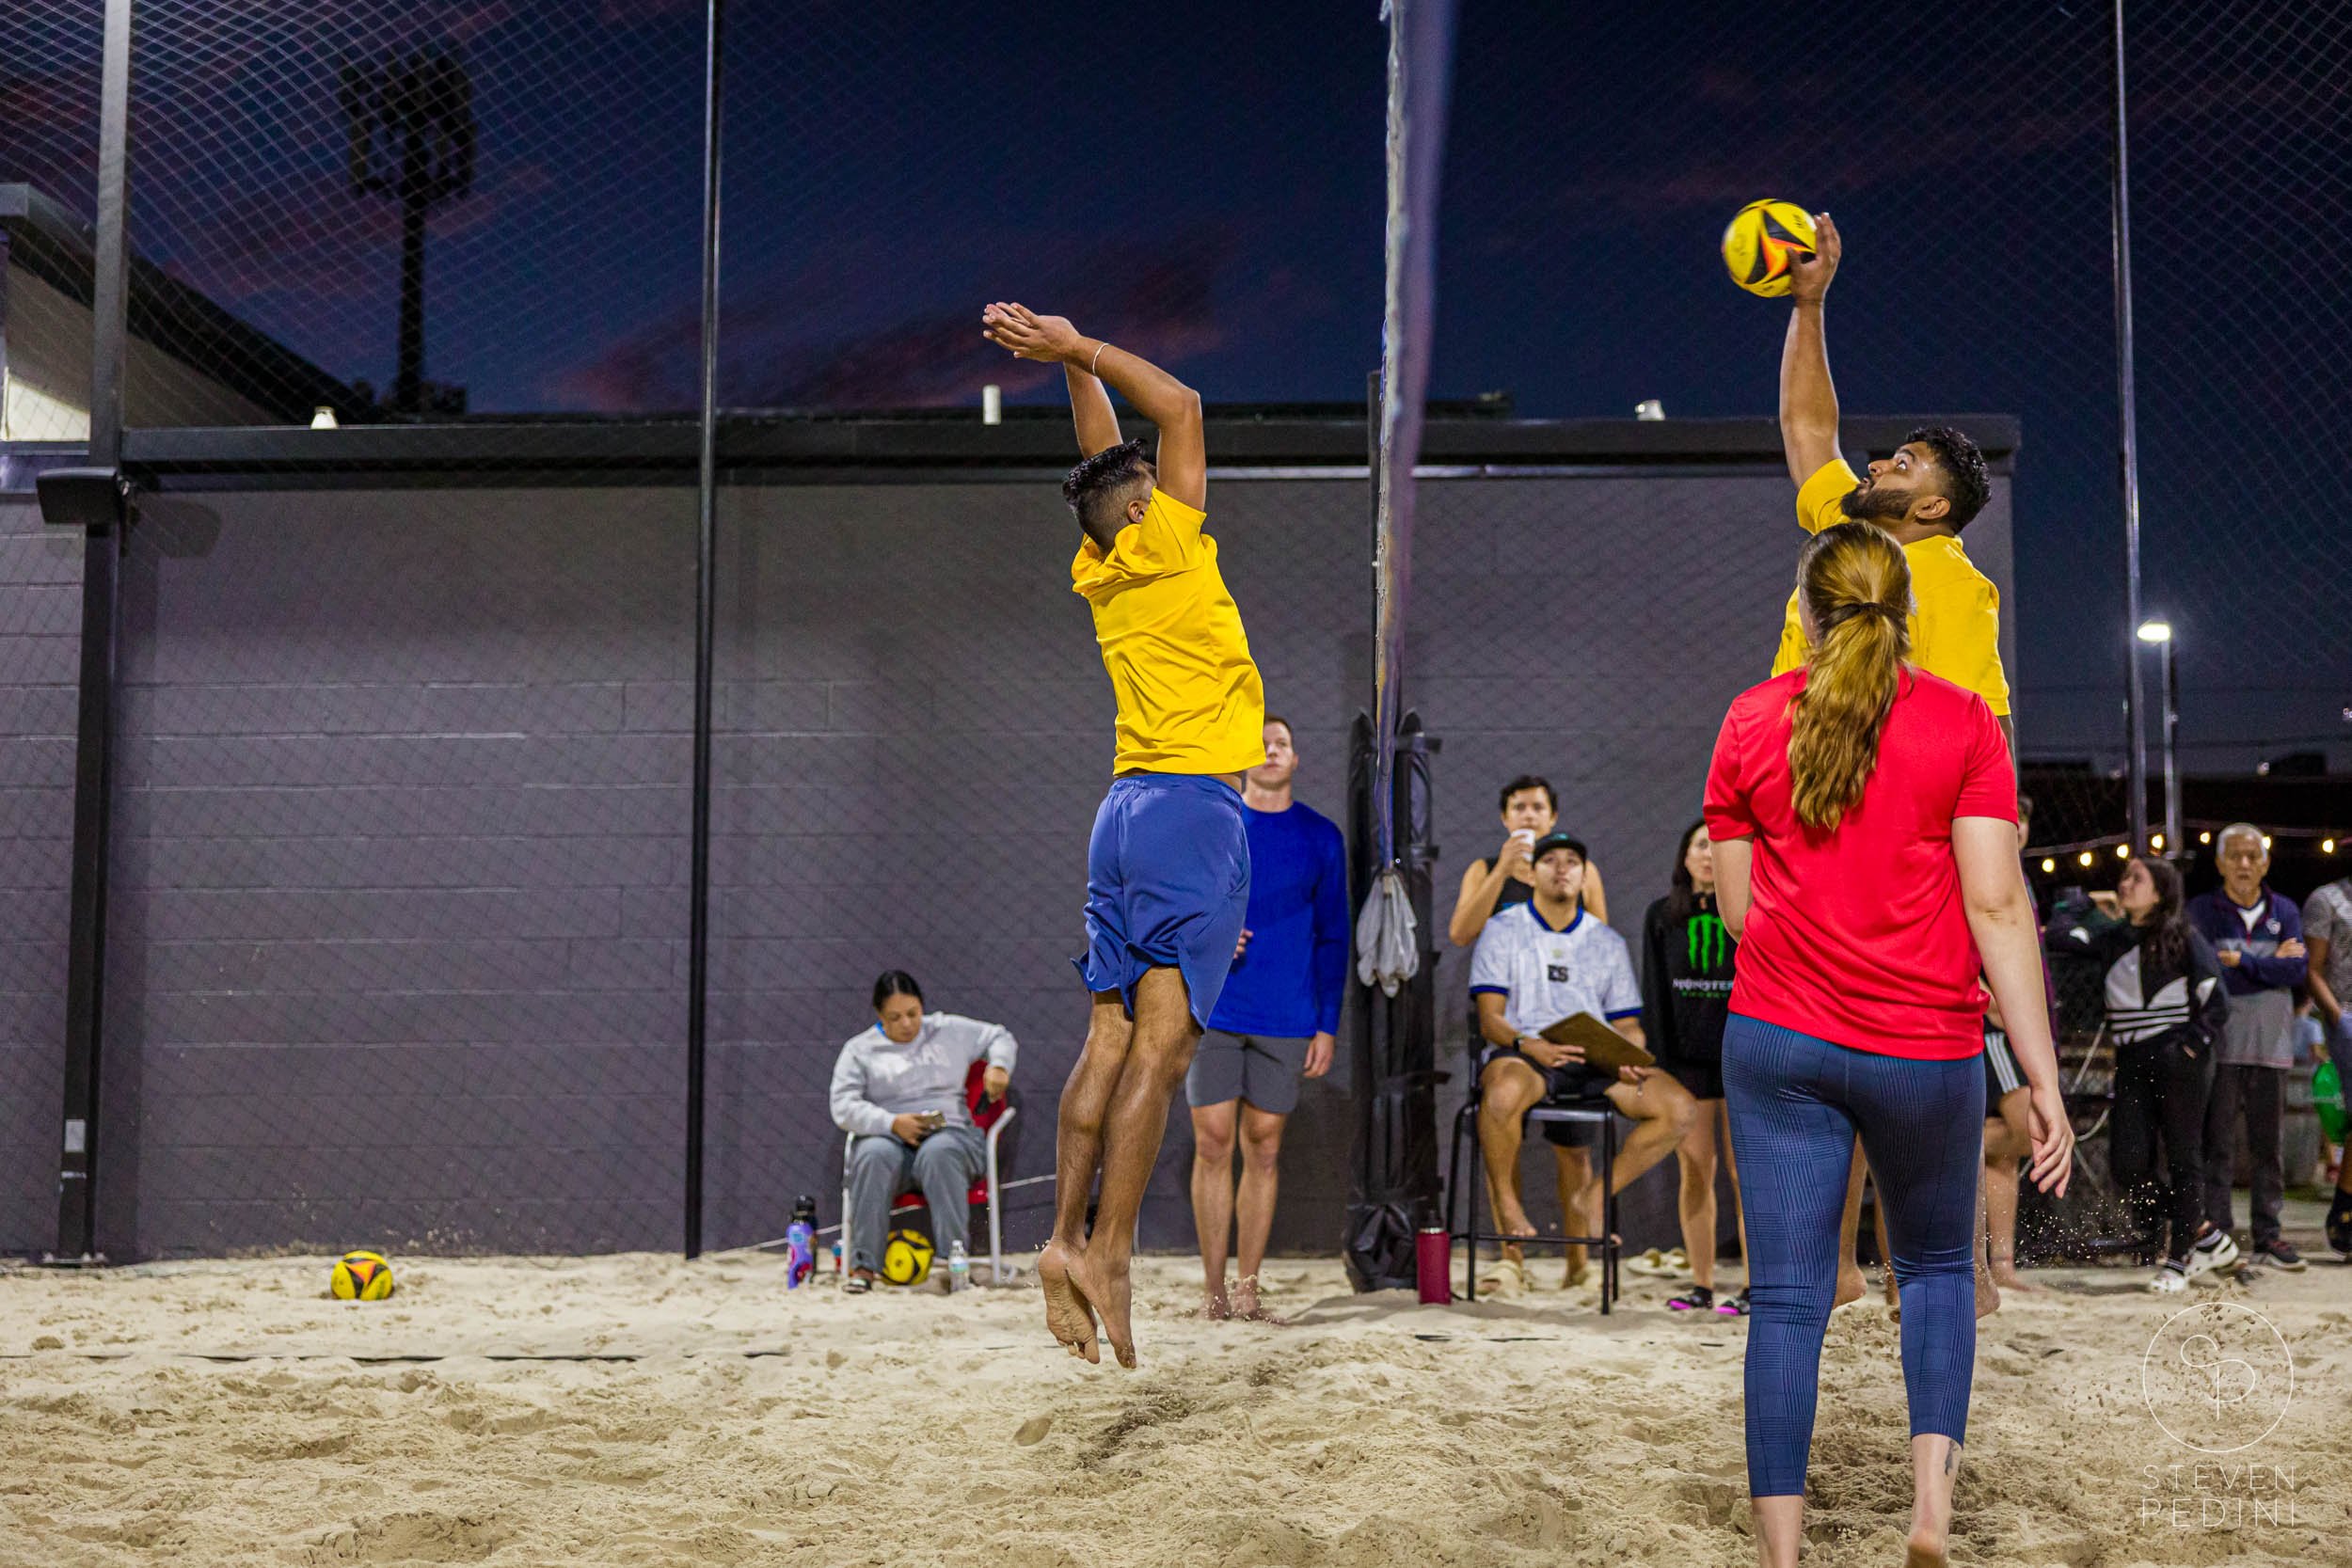 Steven Pedini Photography - Bumpy Pickle - Sand Volleyball - Houston TX - World Cup of Volleyball - 00363.jpg